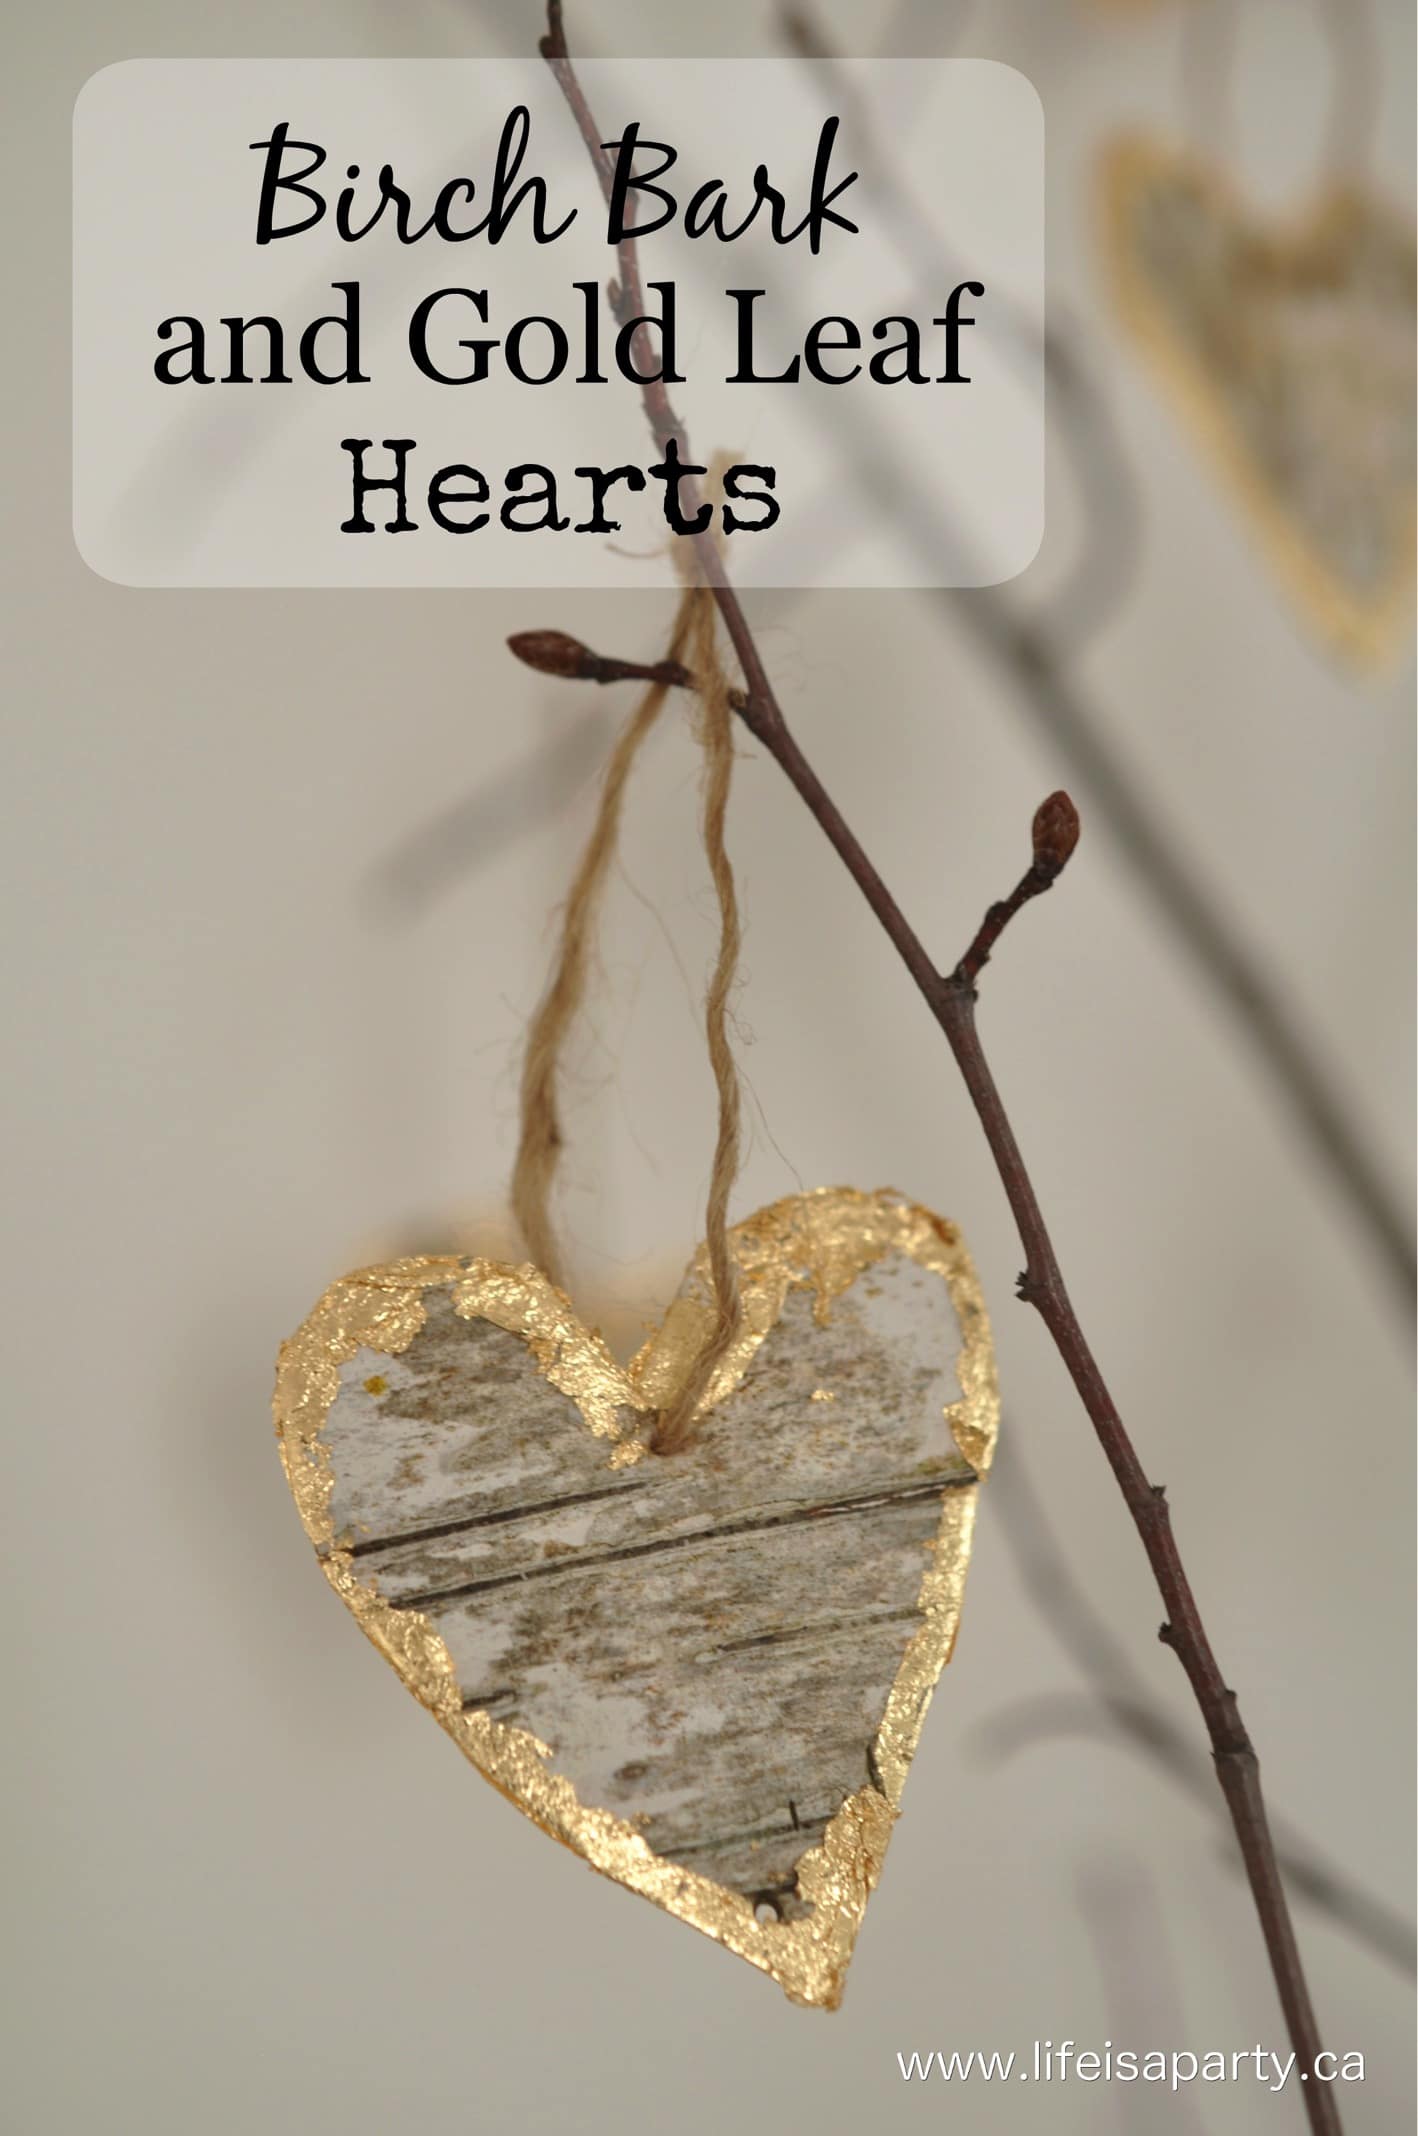 Birch Bark Gold Leaf Hearts: Easy diy from birch bark and gold leaf, perfect as neutral Valentine's Day decor, or a nature inspired wedding.